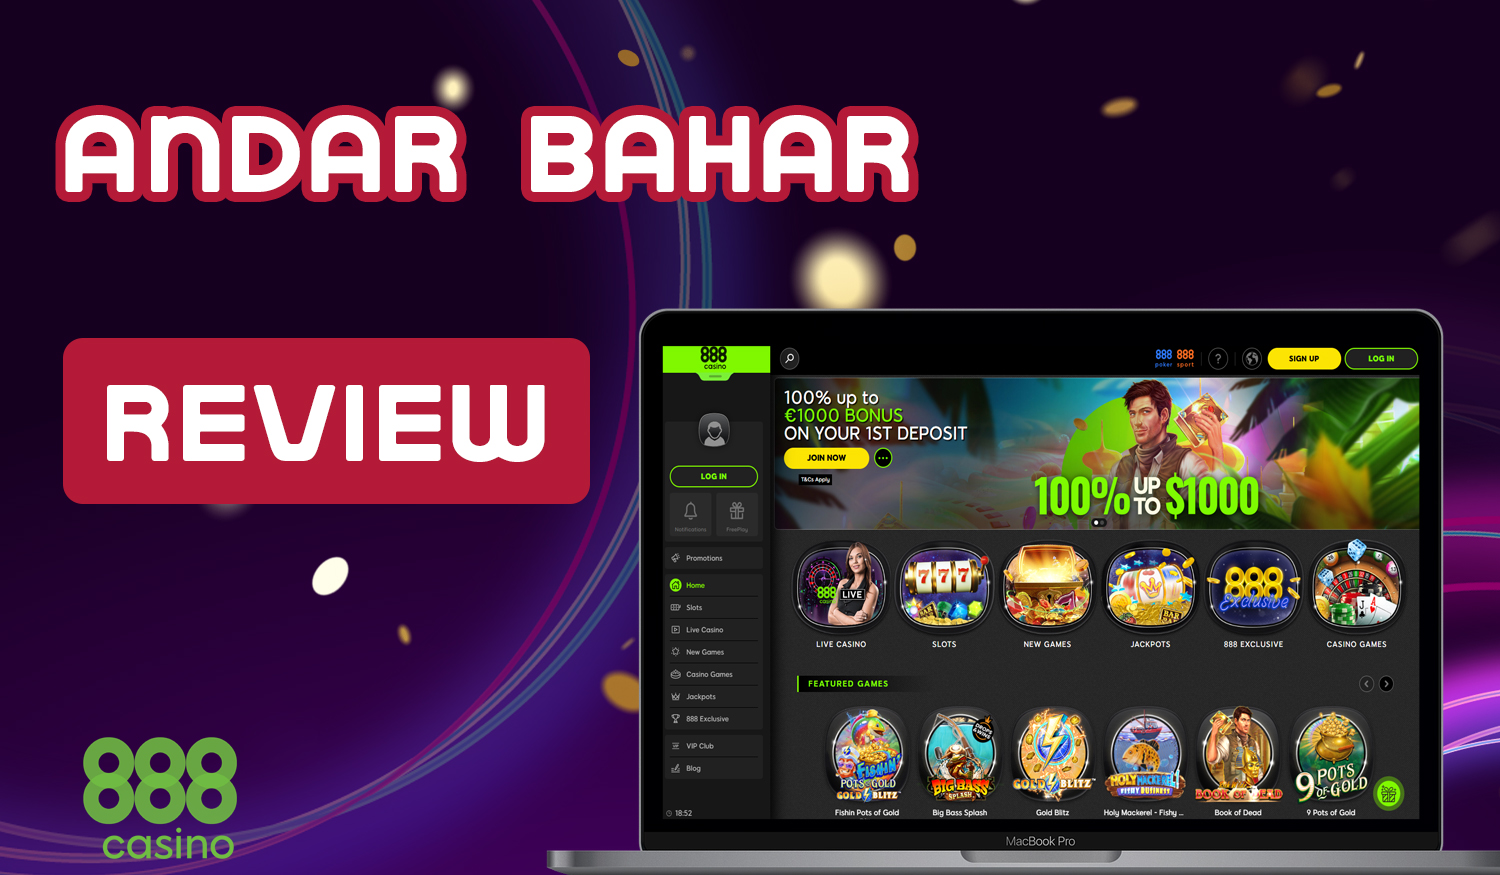 Overview of the exciting Andar Bahar game at 888 casino website